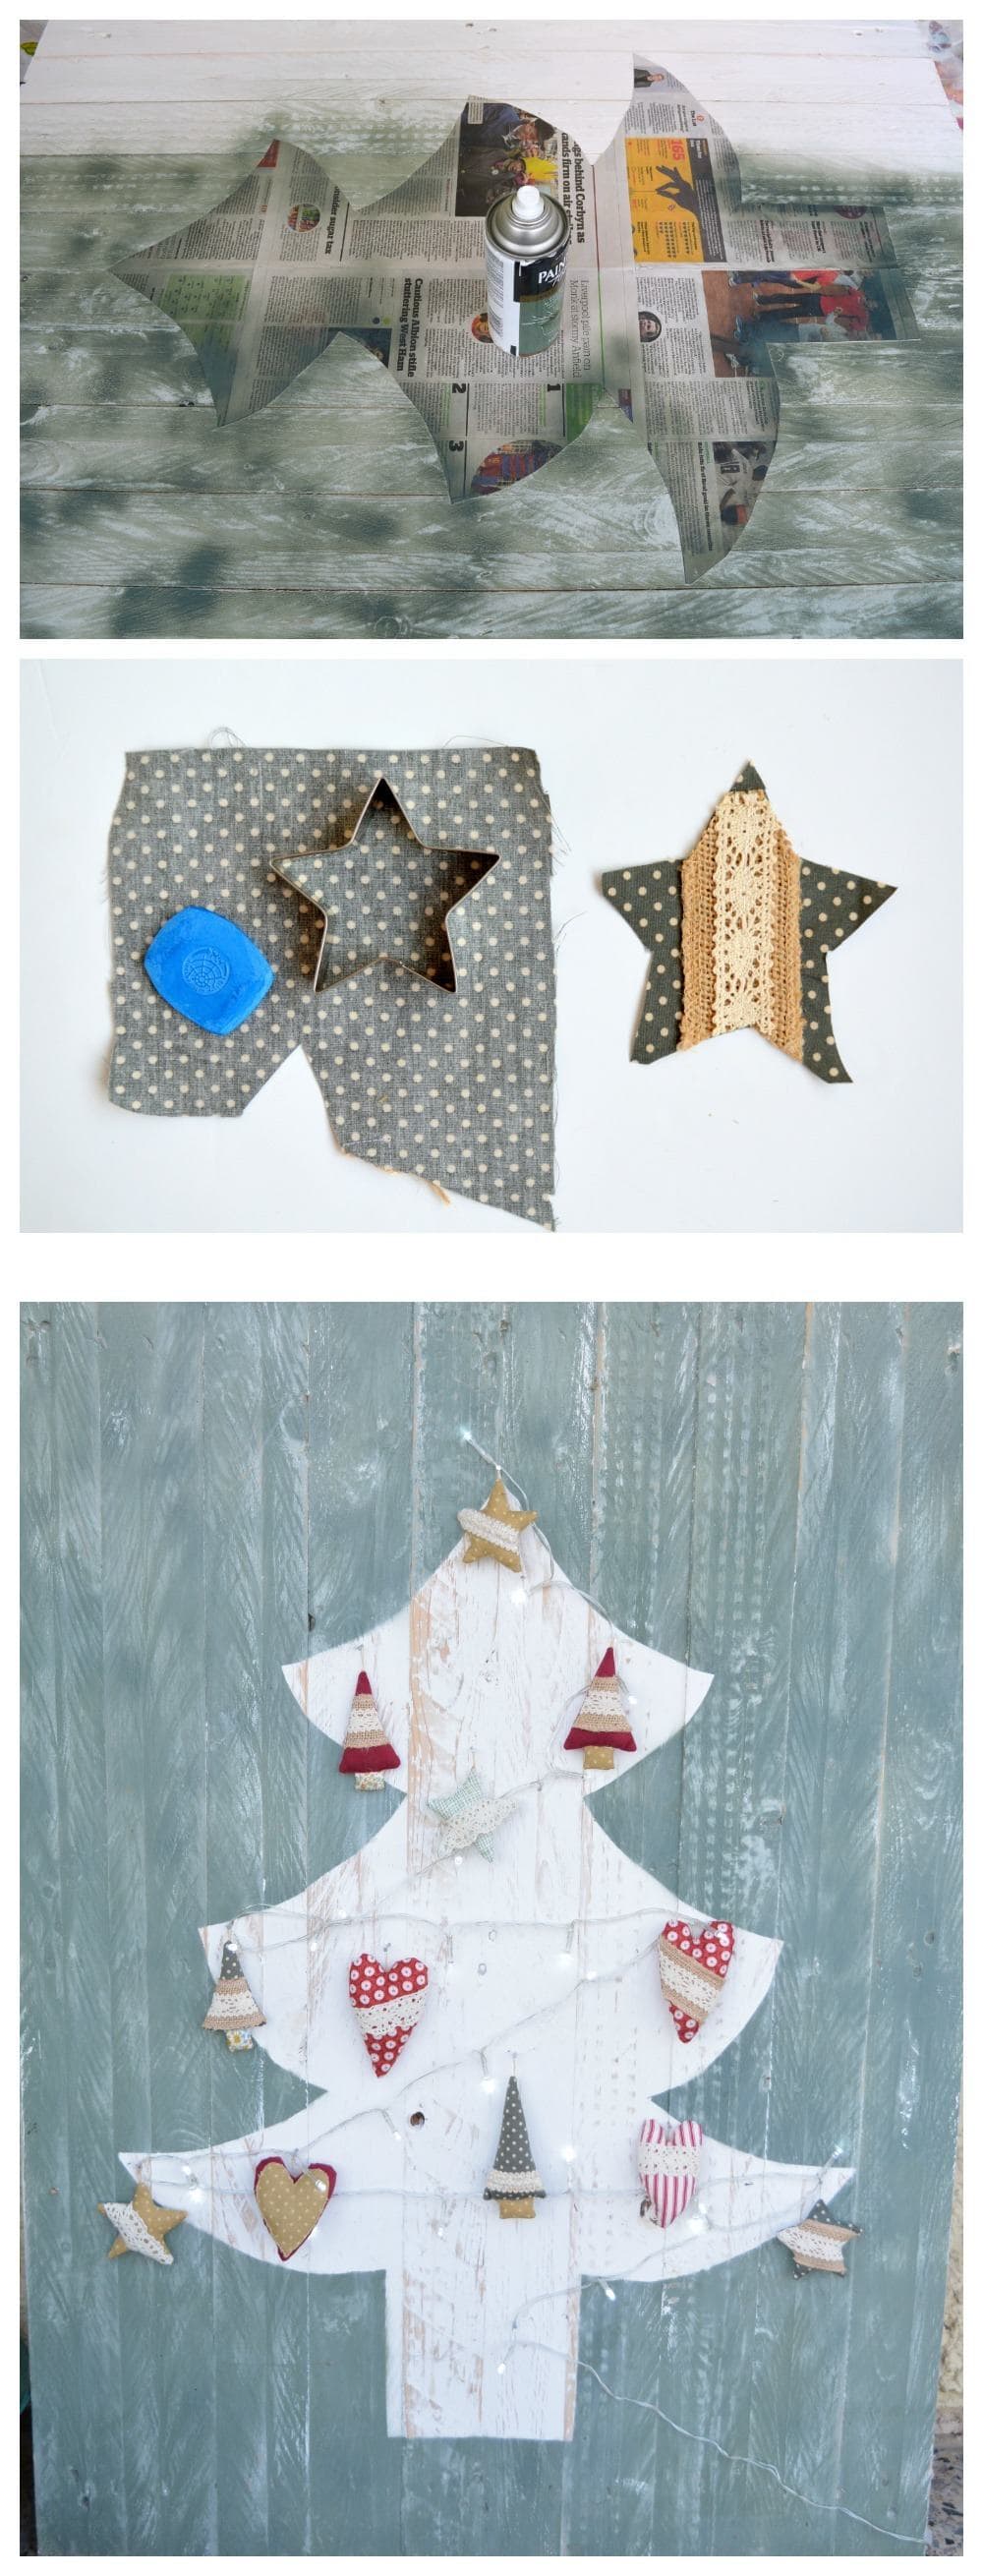 How to make rustic Christmas decorations